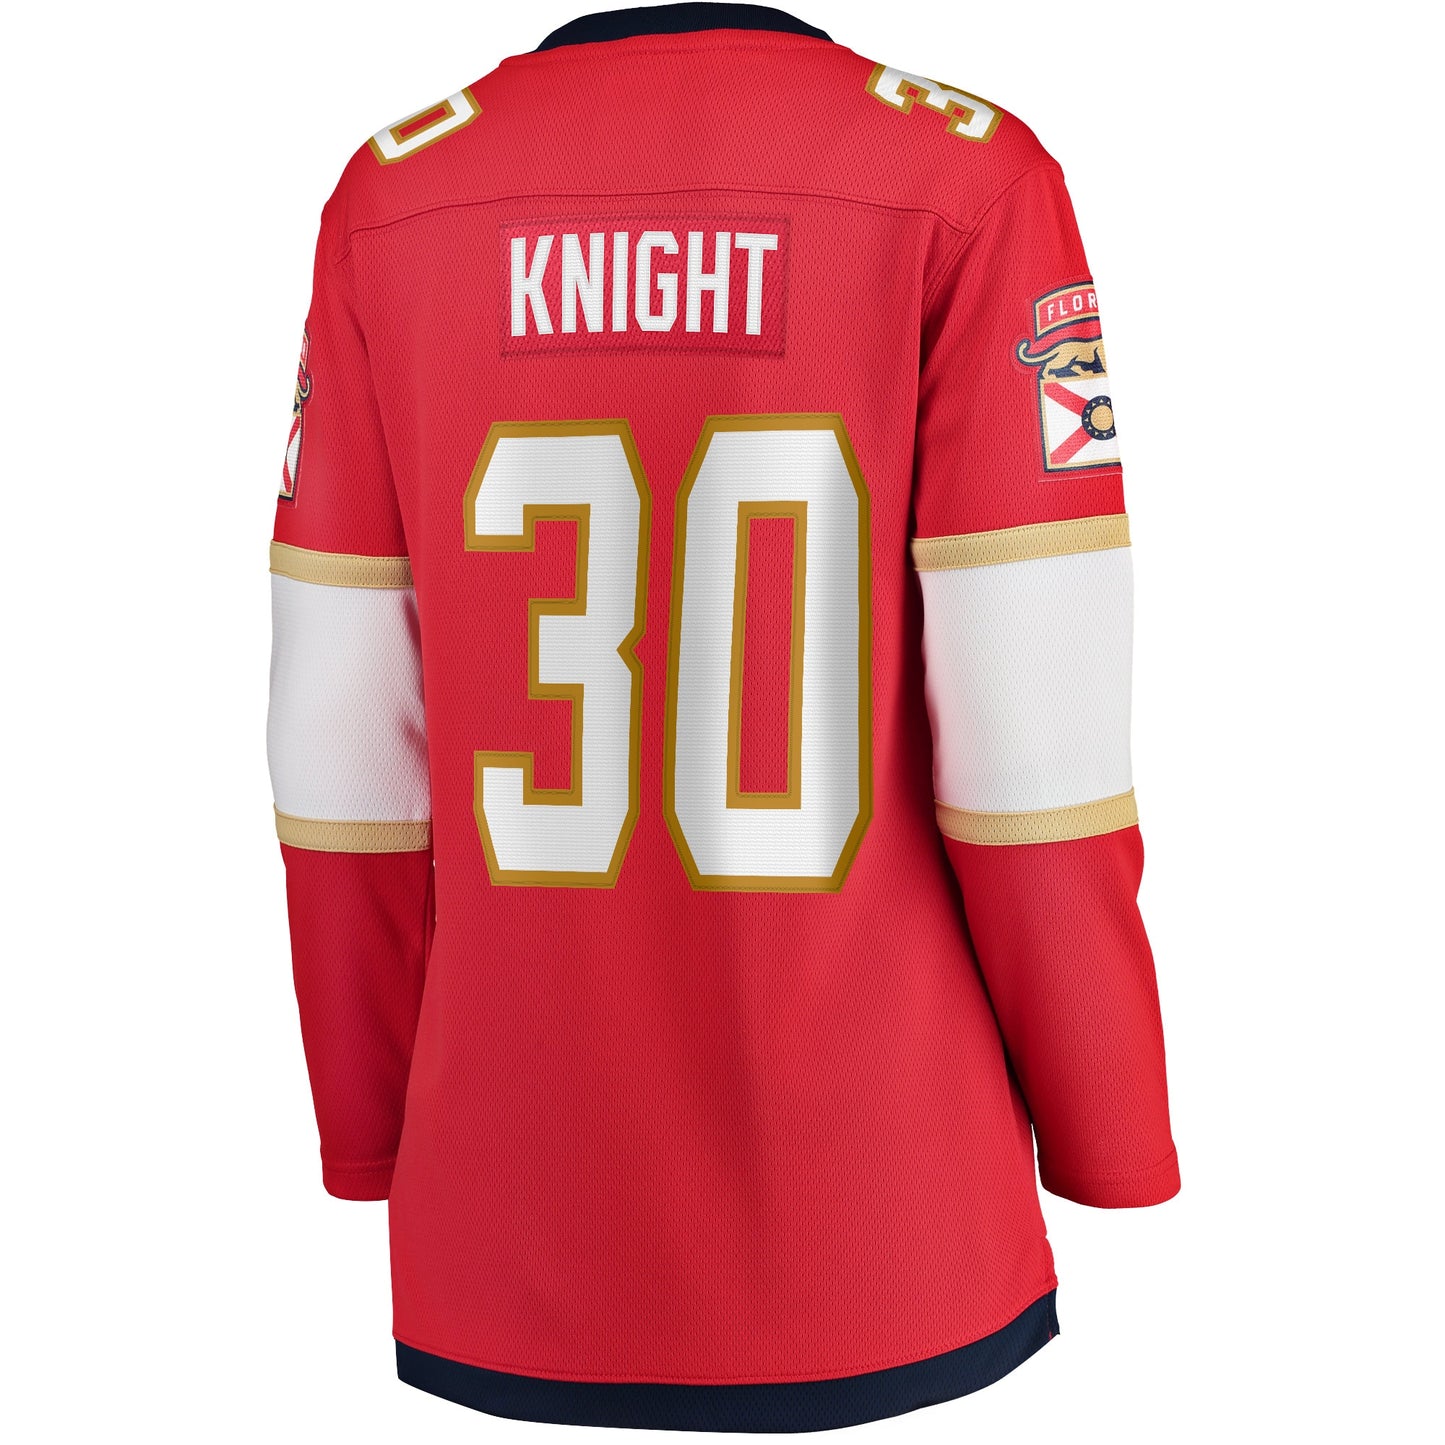 Spencer Knight Florida Panthers Fanatics Branded Women's 2017/18 Home Breakaway Jersey - Red